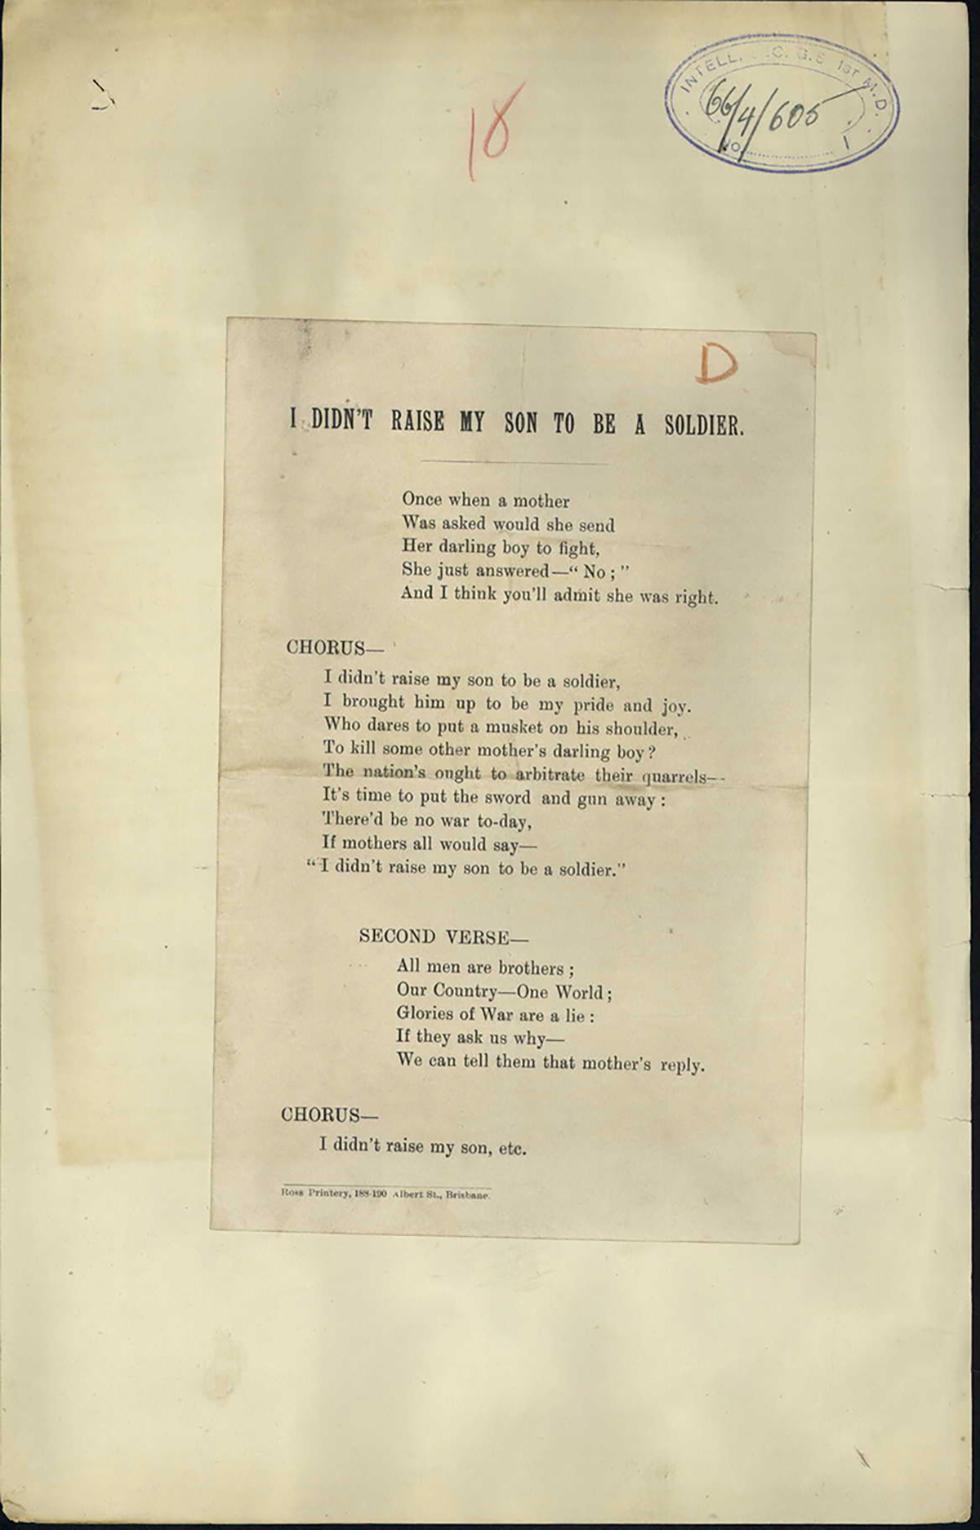 Anti-war song - lyrics for 'I Didn't Raise My Son to be a Soldier'.